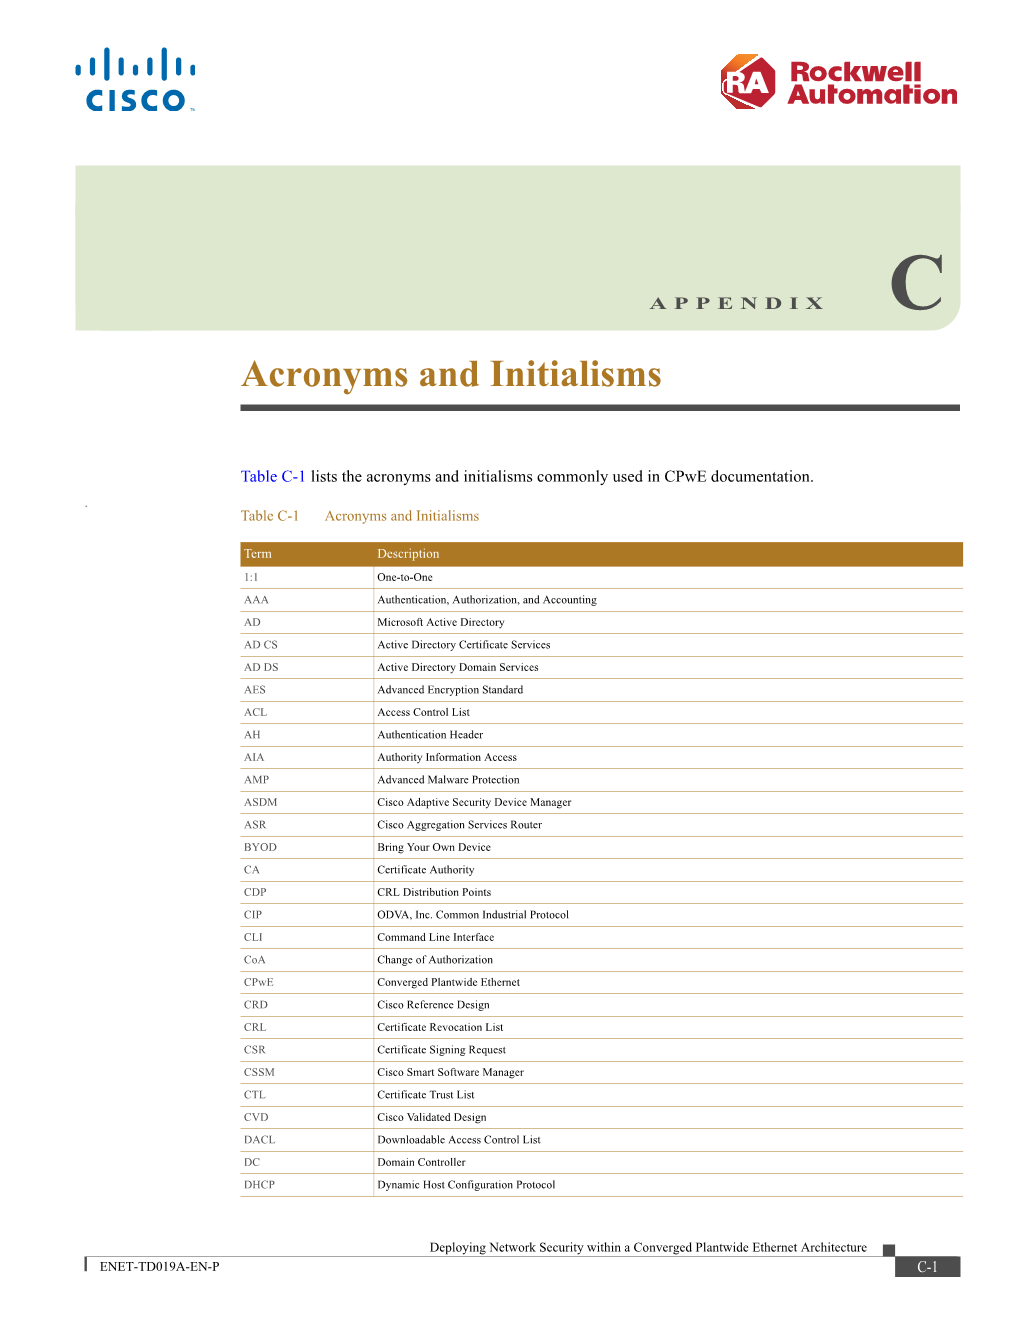 Acronyms and Initialisms